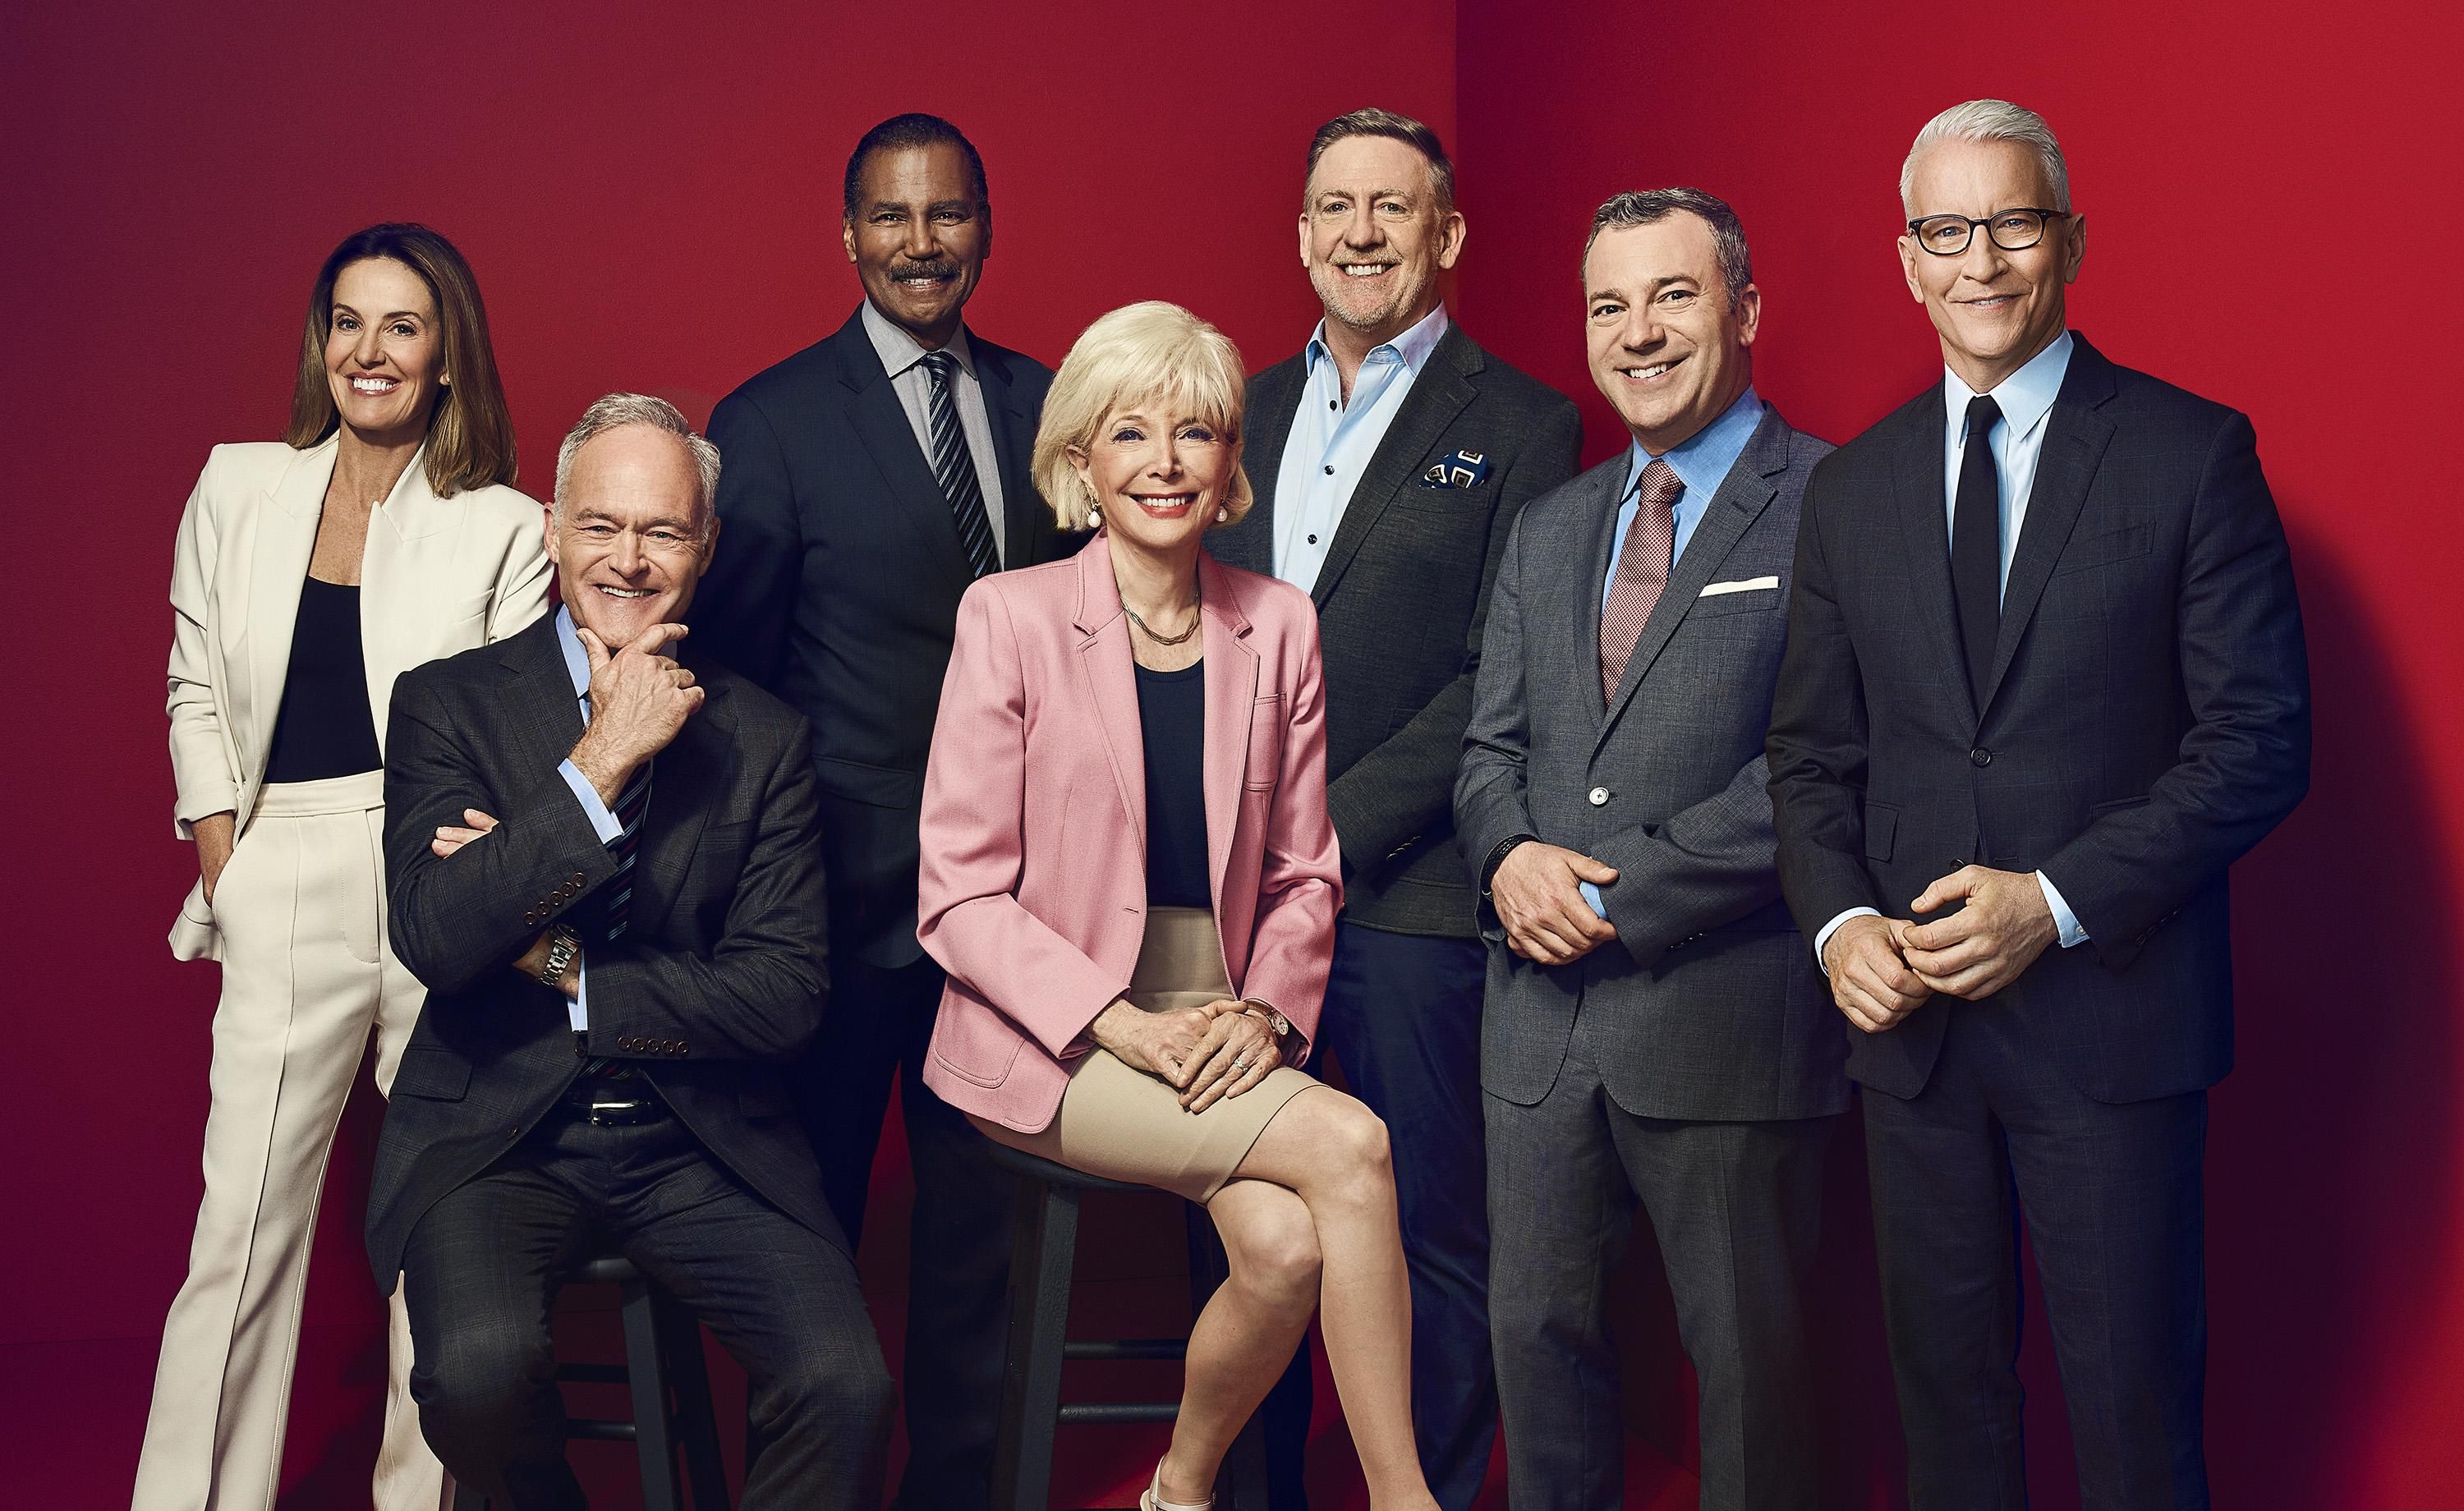 The 60 Minutes crew poses smiling against a red backdrop.